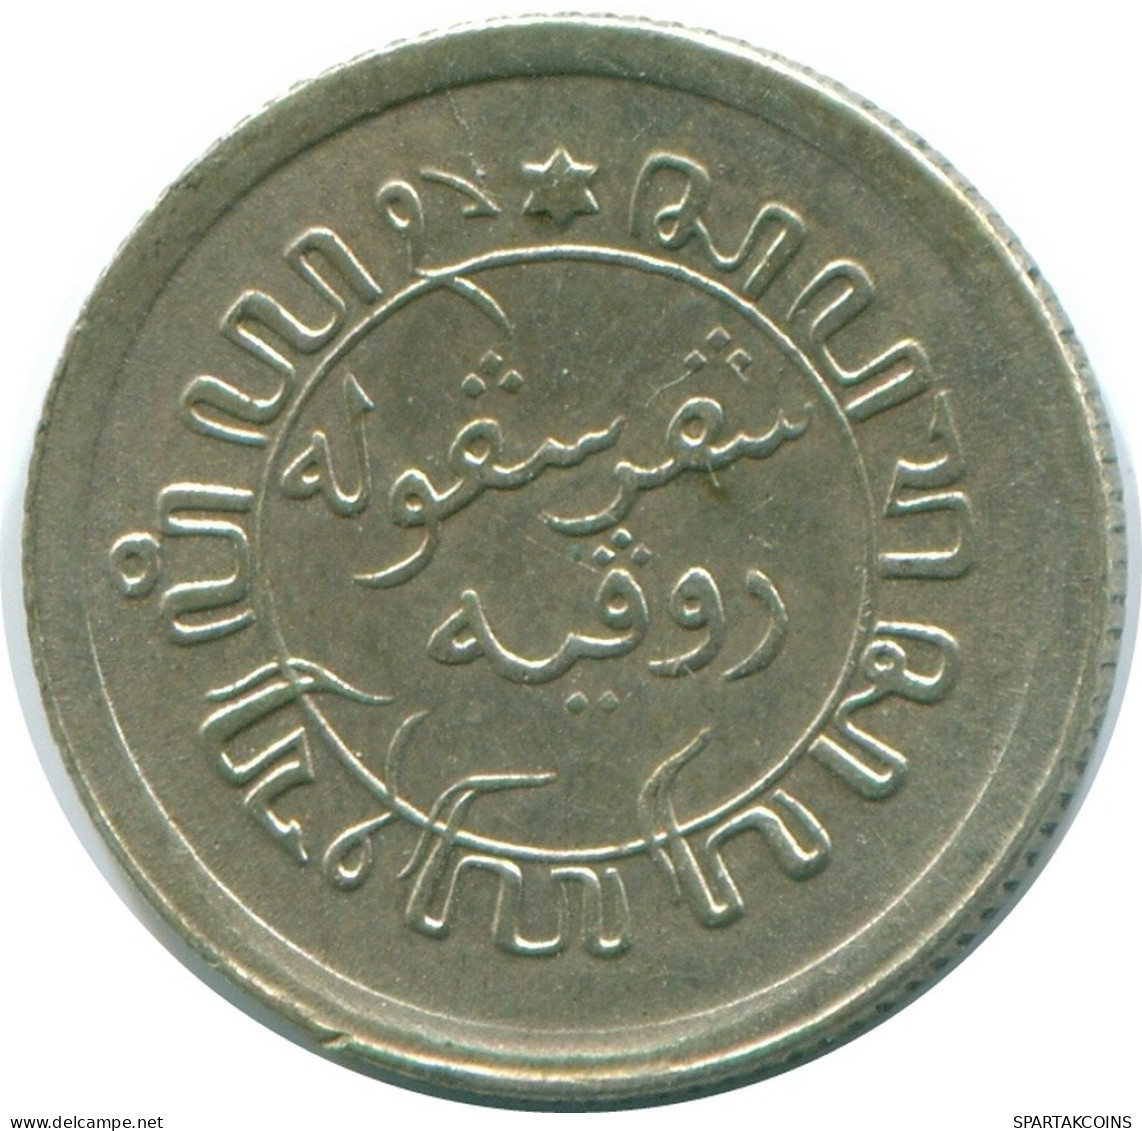 1/10 GULDEN 1920 NETHERLANDS EAST INDIES SILVER Colonial Coin #NL13394.3.U.A - Indes Neerlandesas